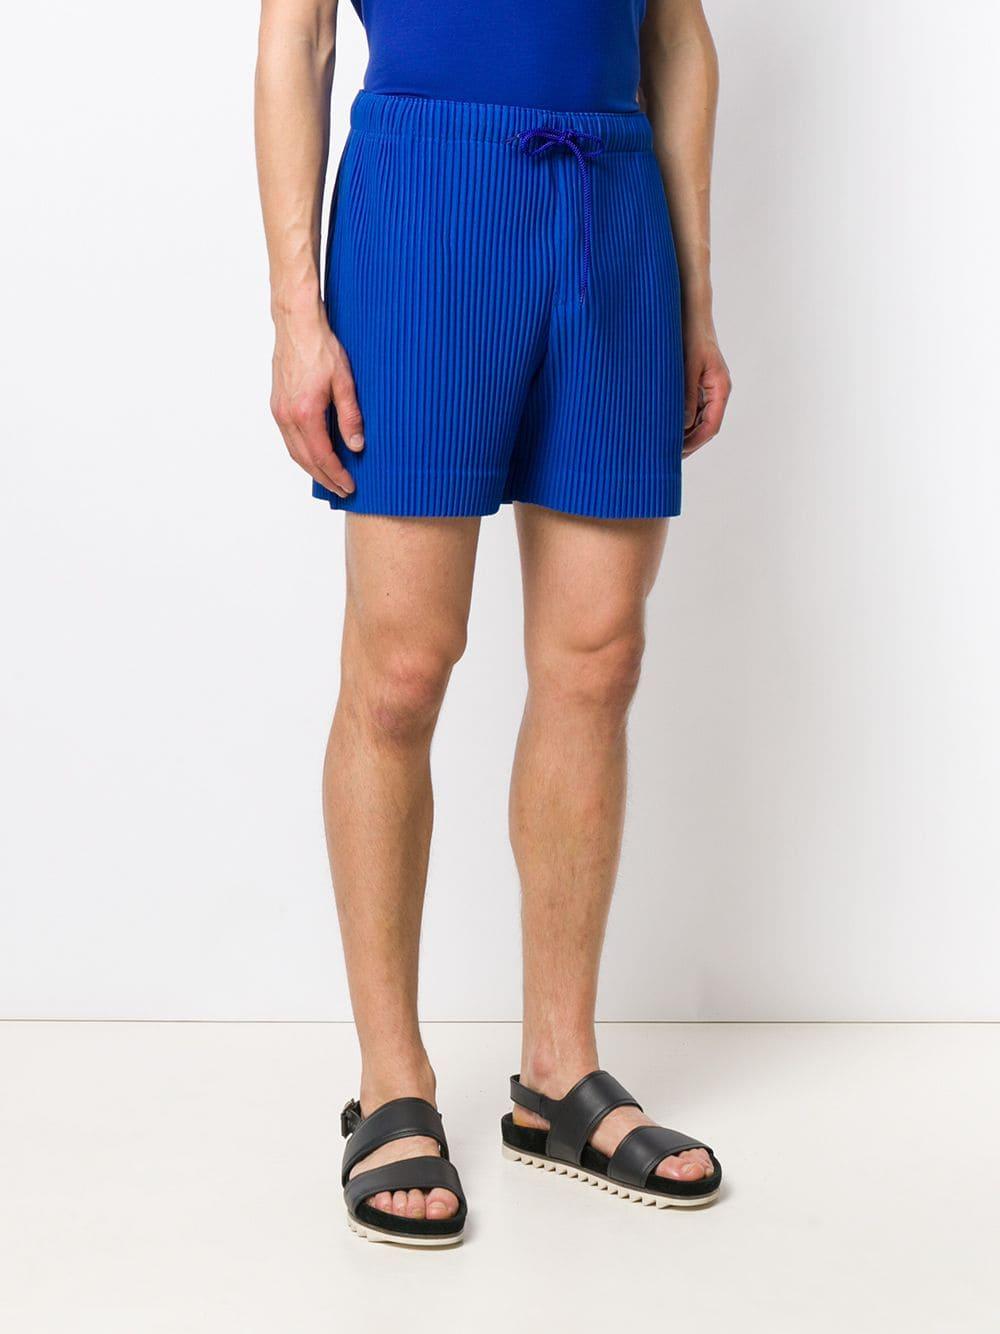 Homme Plissé Issey Miyake Drawstring Ribbed Shorts in Blue for Men - Lyst